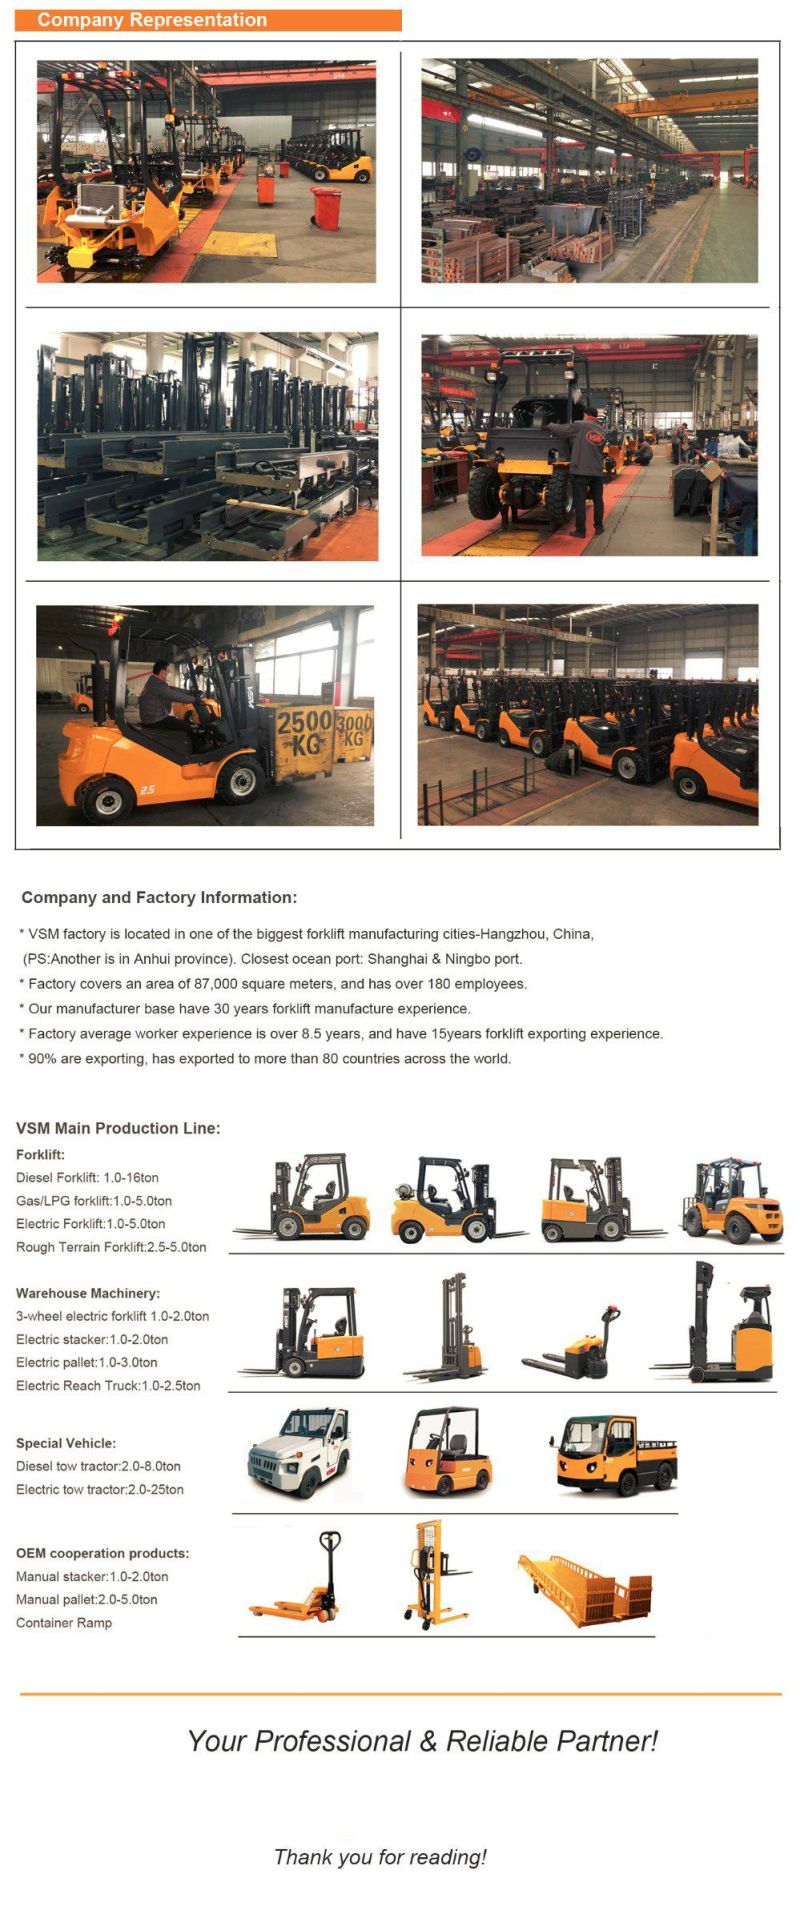 3 Ton Gas/LPG Forklift Truck for Sale